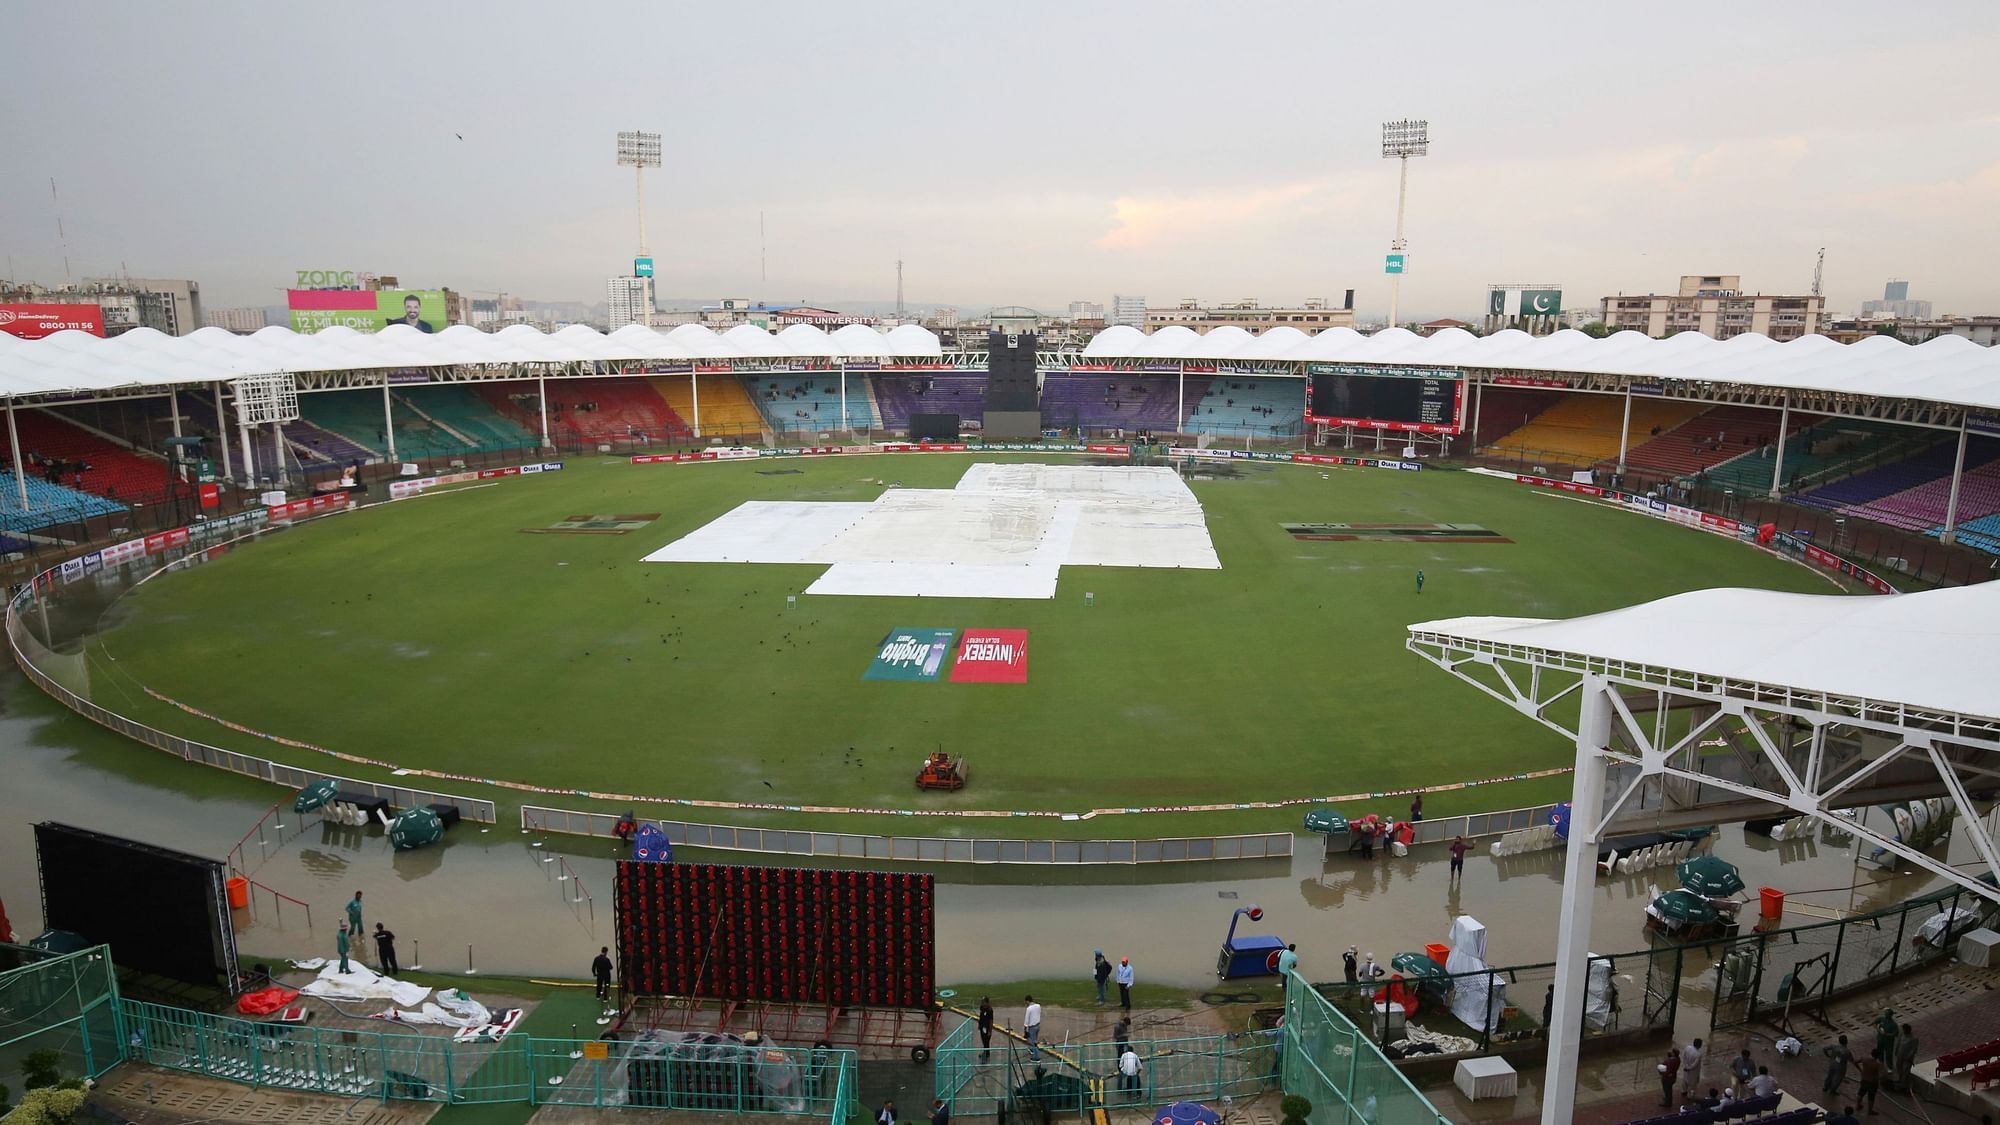 The ICC posted a hilarious tweet to announce the rescheduling of the second Sri Lanka vs Pakistan ODI in Karachi.